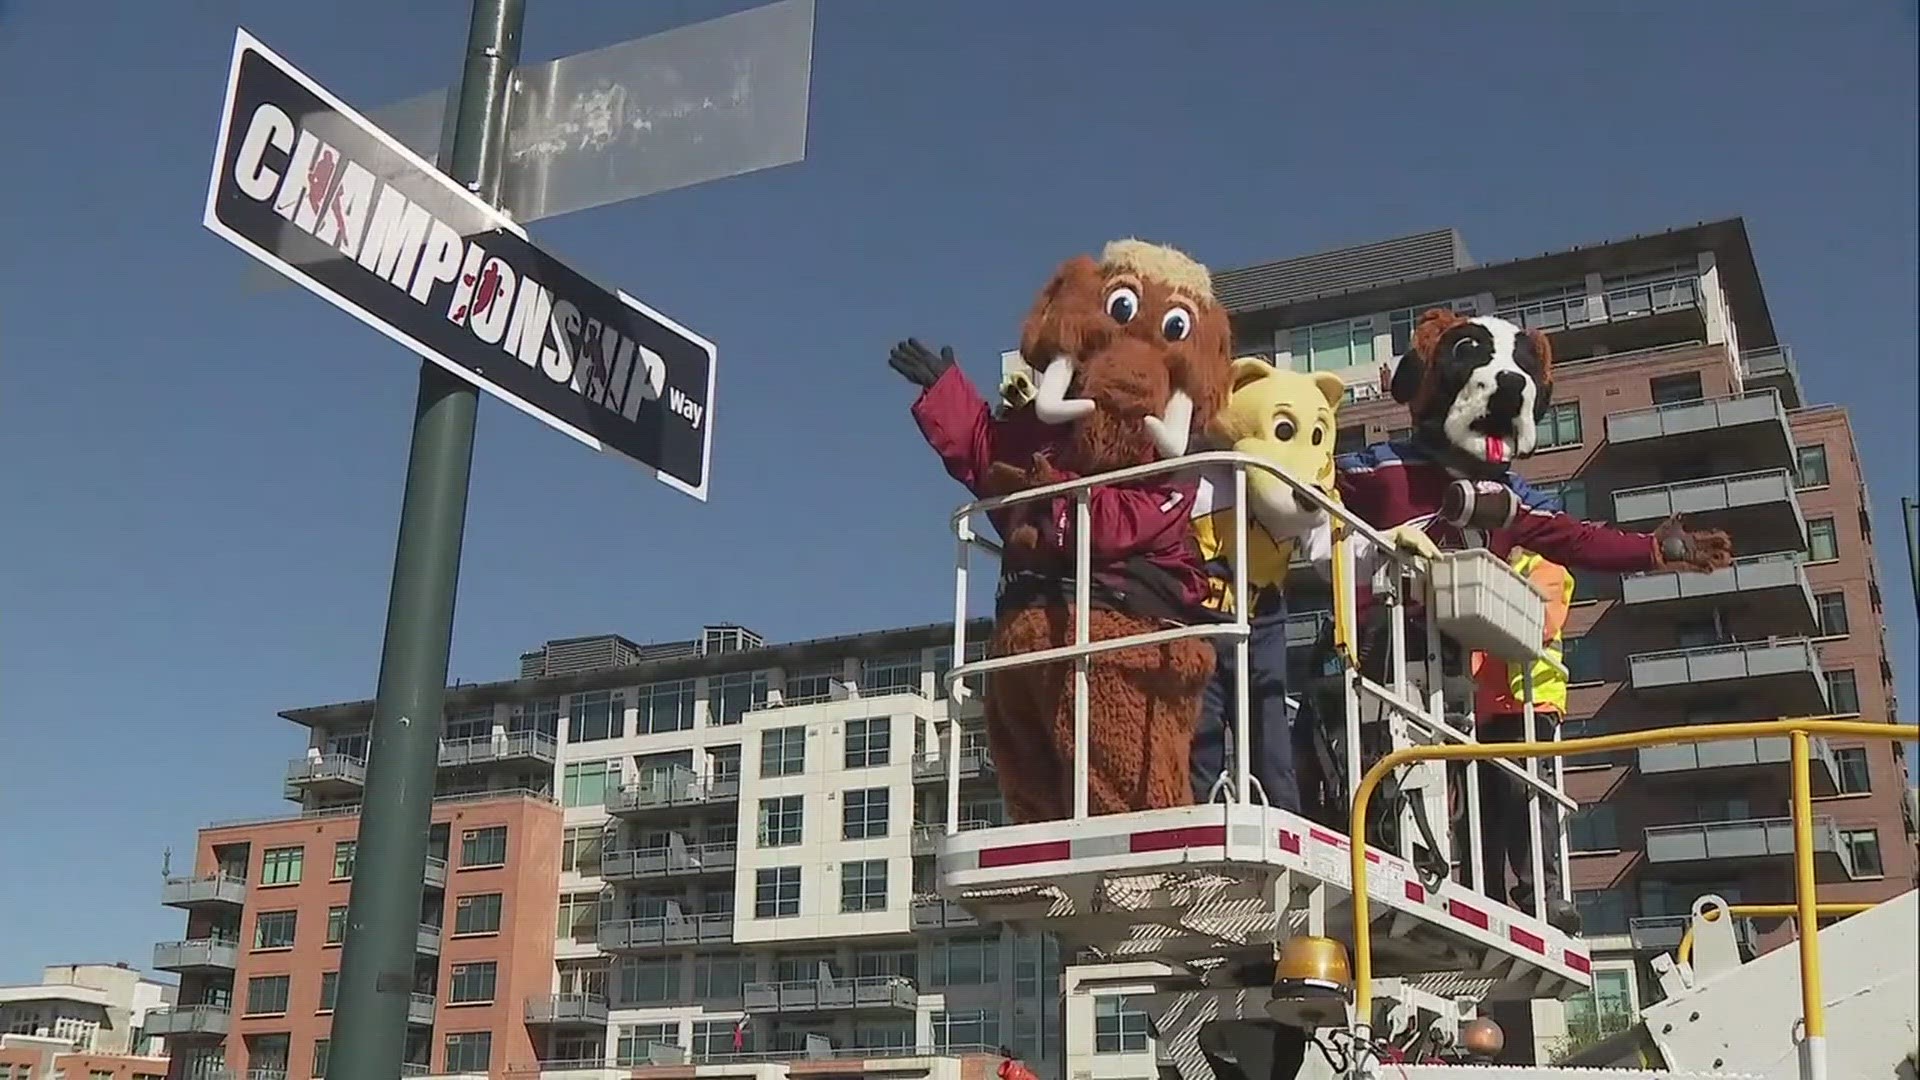 A stretch of Wewetta Street was renamed to Championship Way in celebration of recent championships won by the Denver Nuggets, Colorado Avalanche and Colorado Mammoth